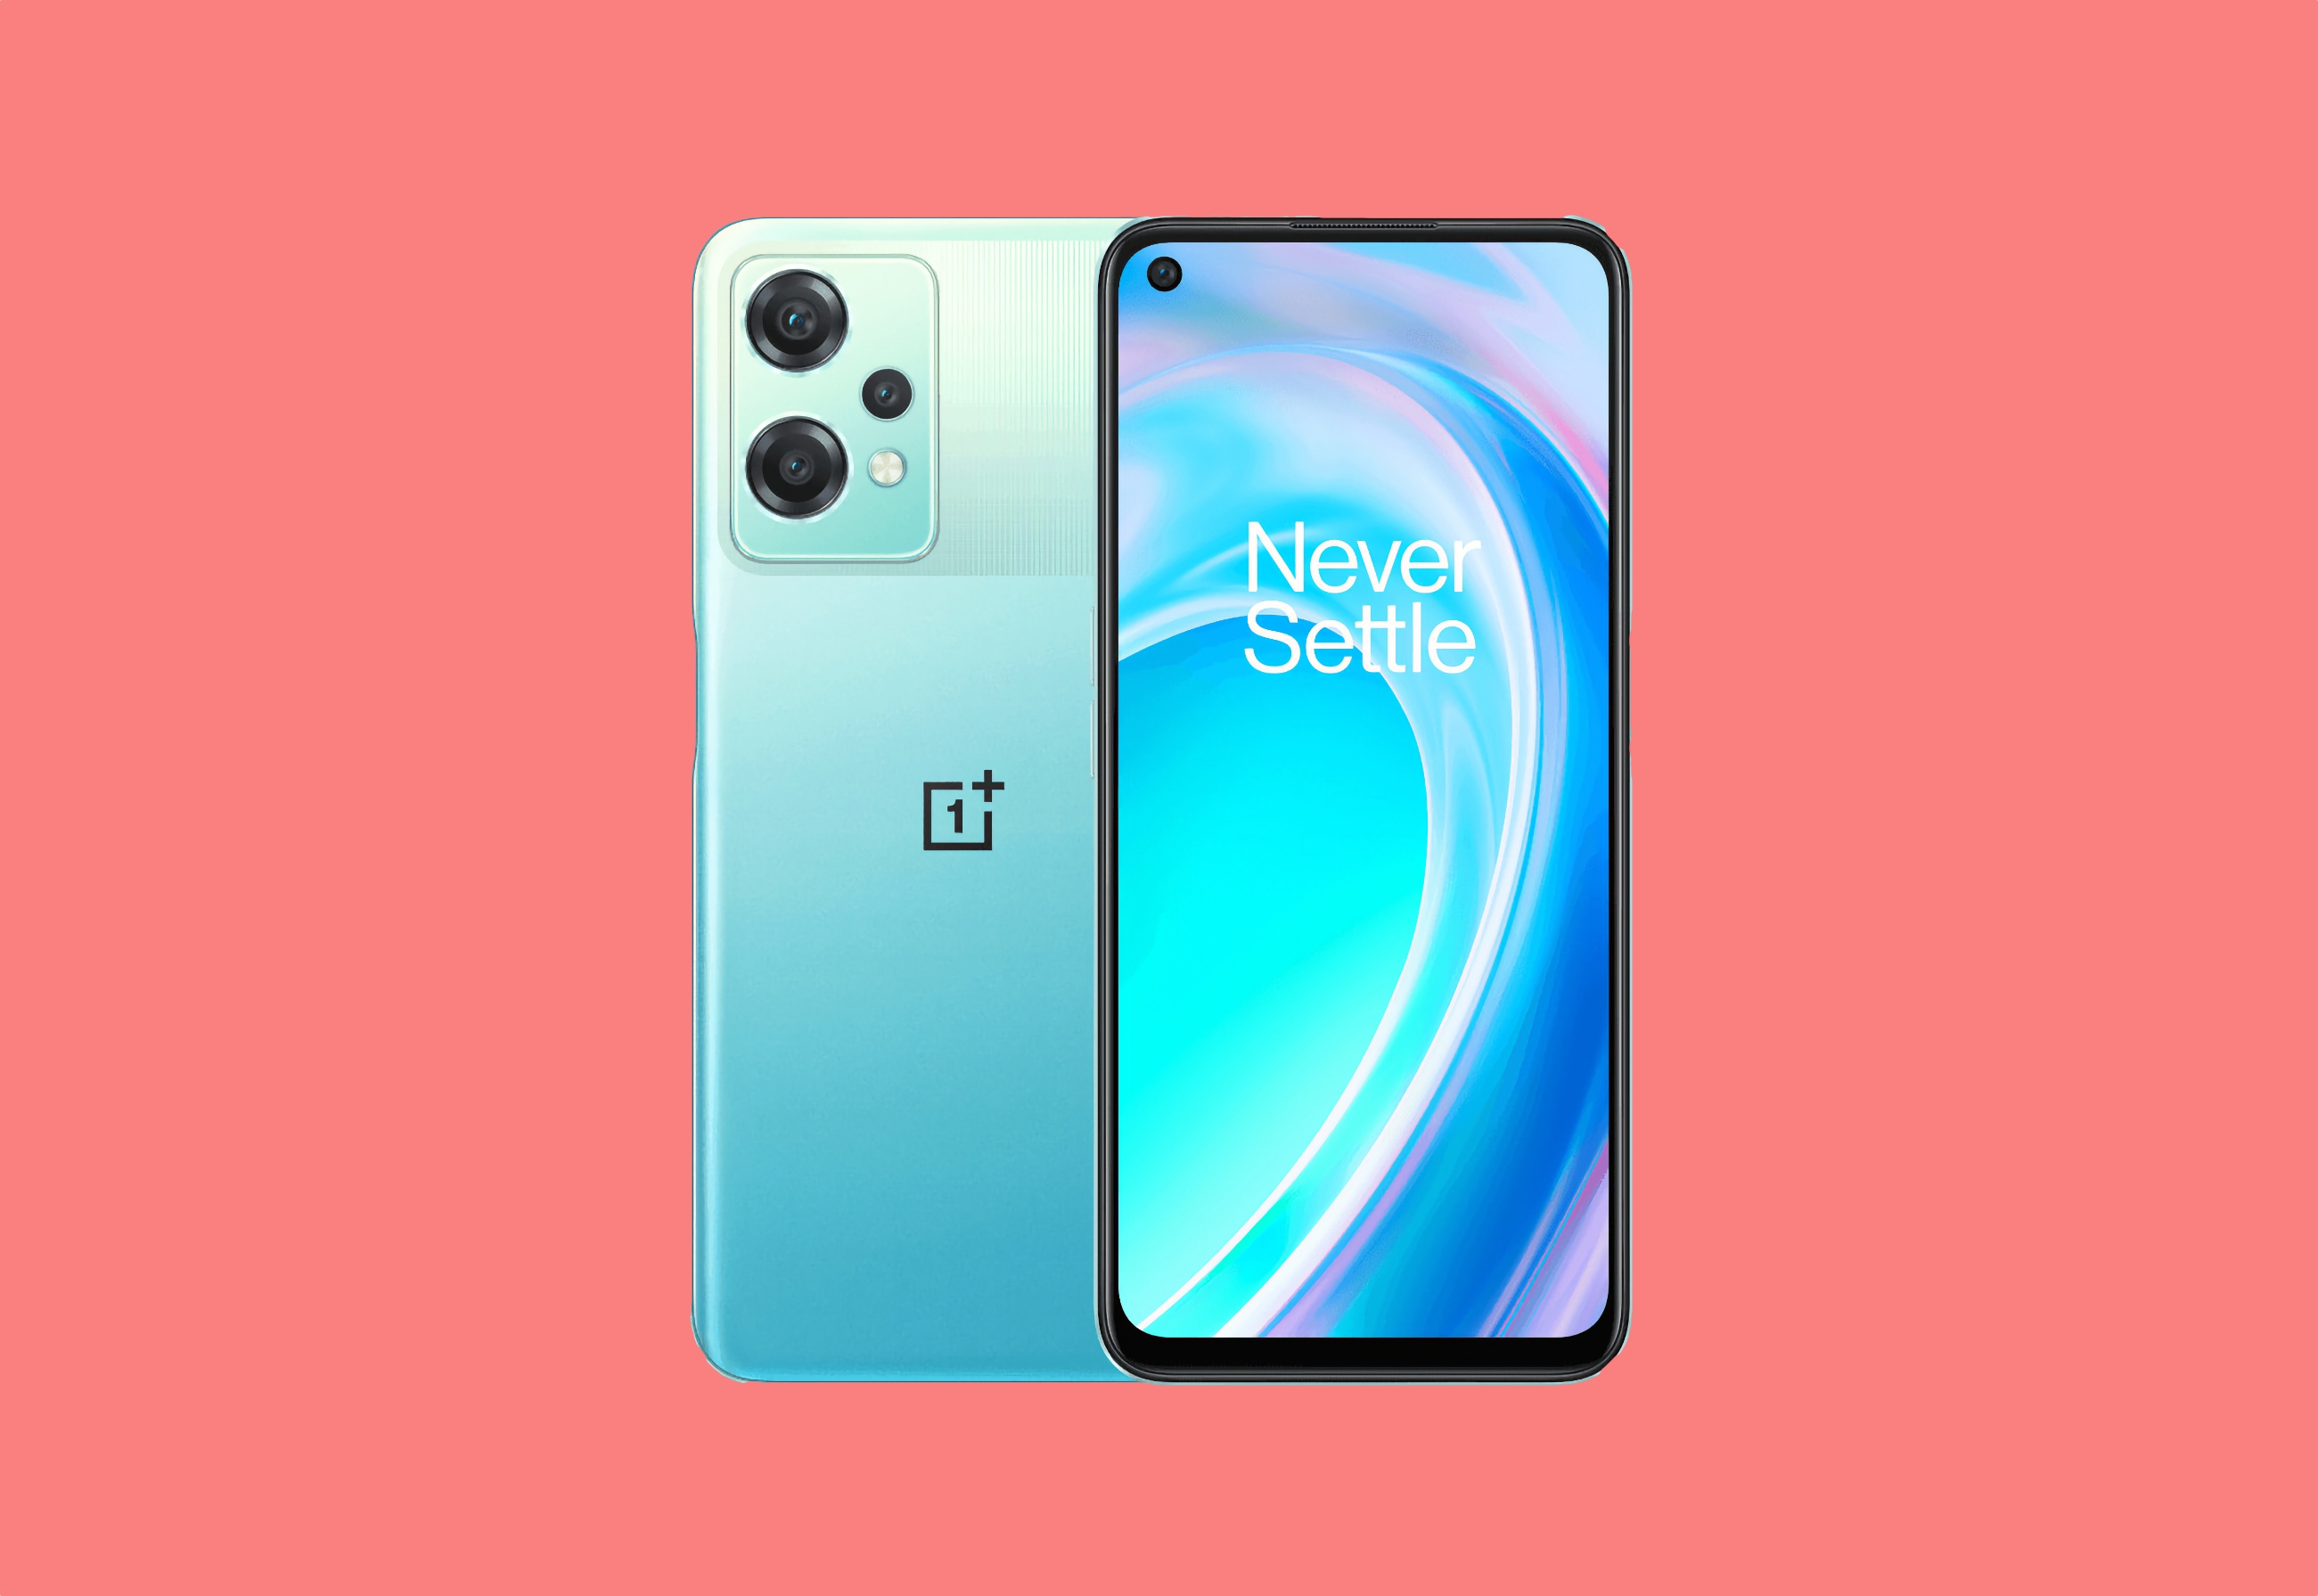 OnePlus launched Android 13 testing with OxygenOS 13 for OnePlus Nord CE 2 Lite 5G budget smartphone